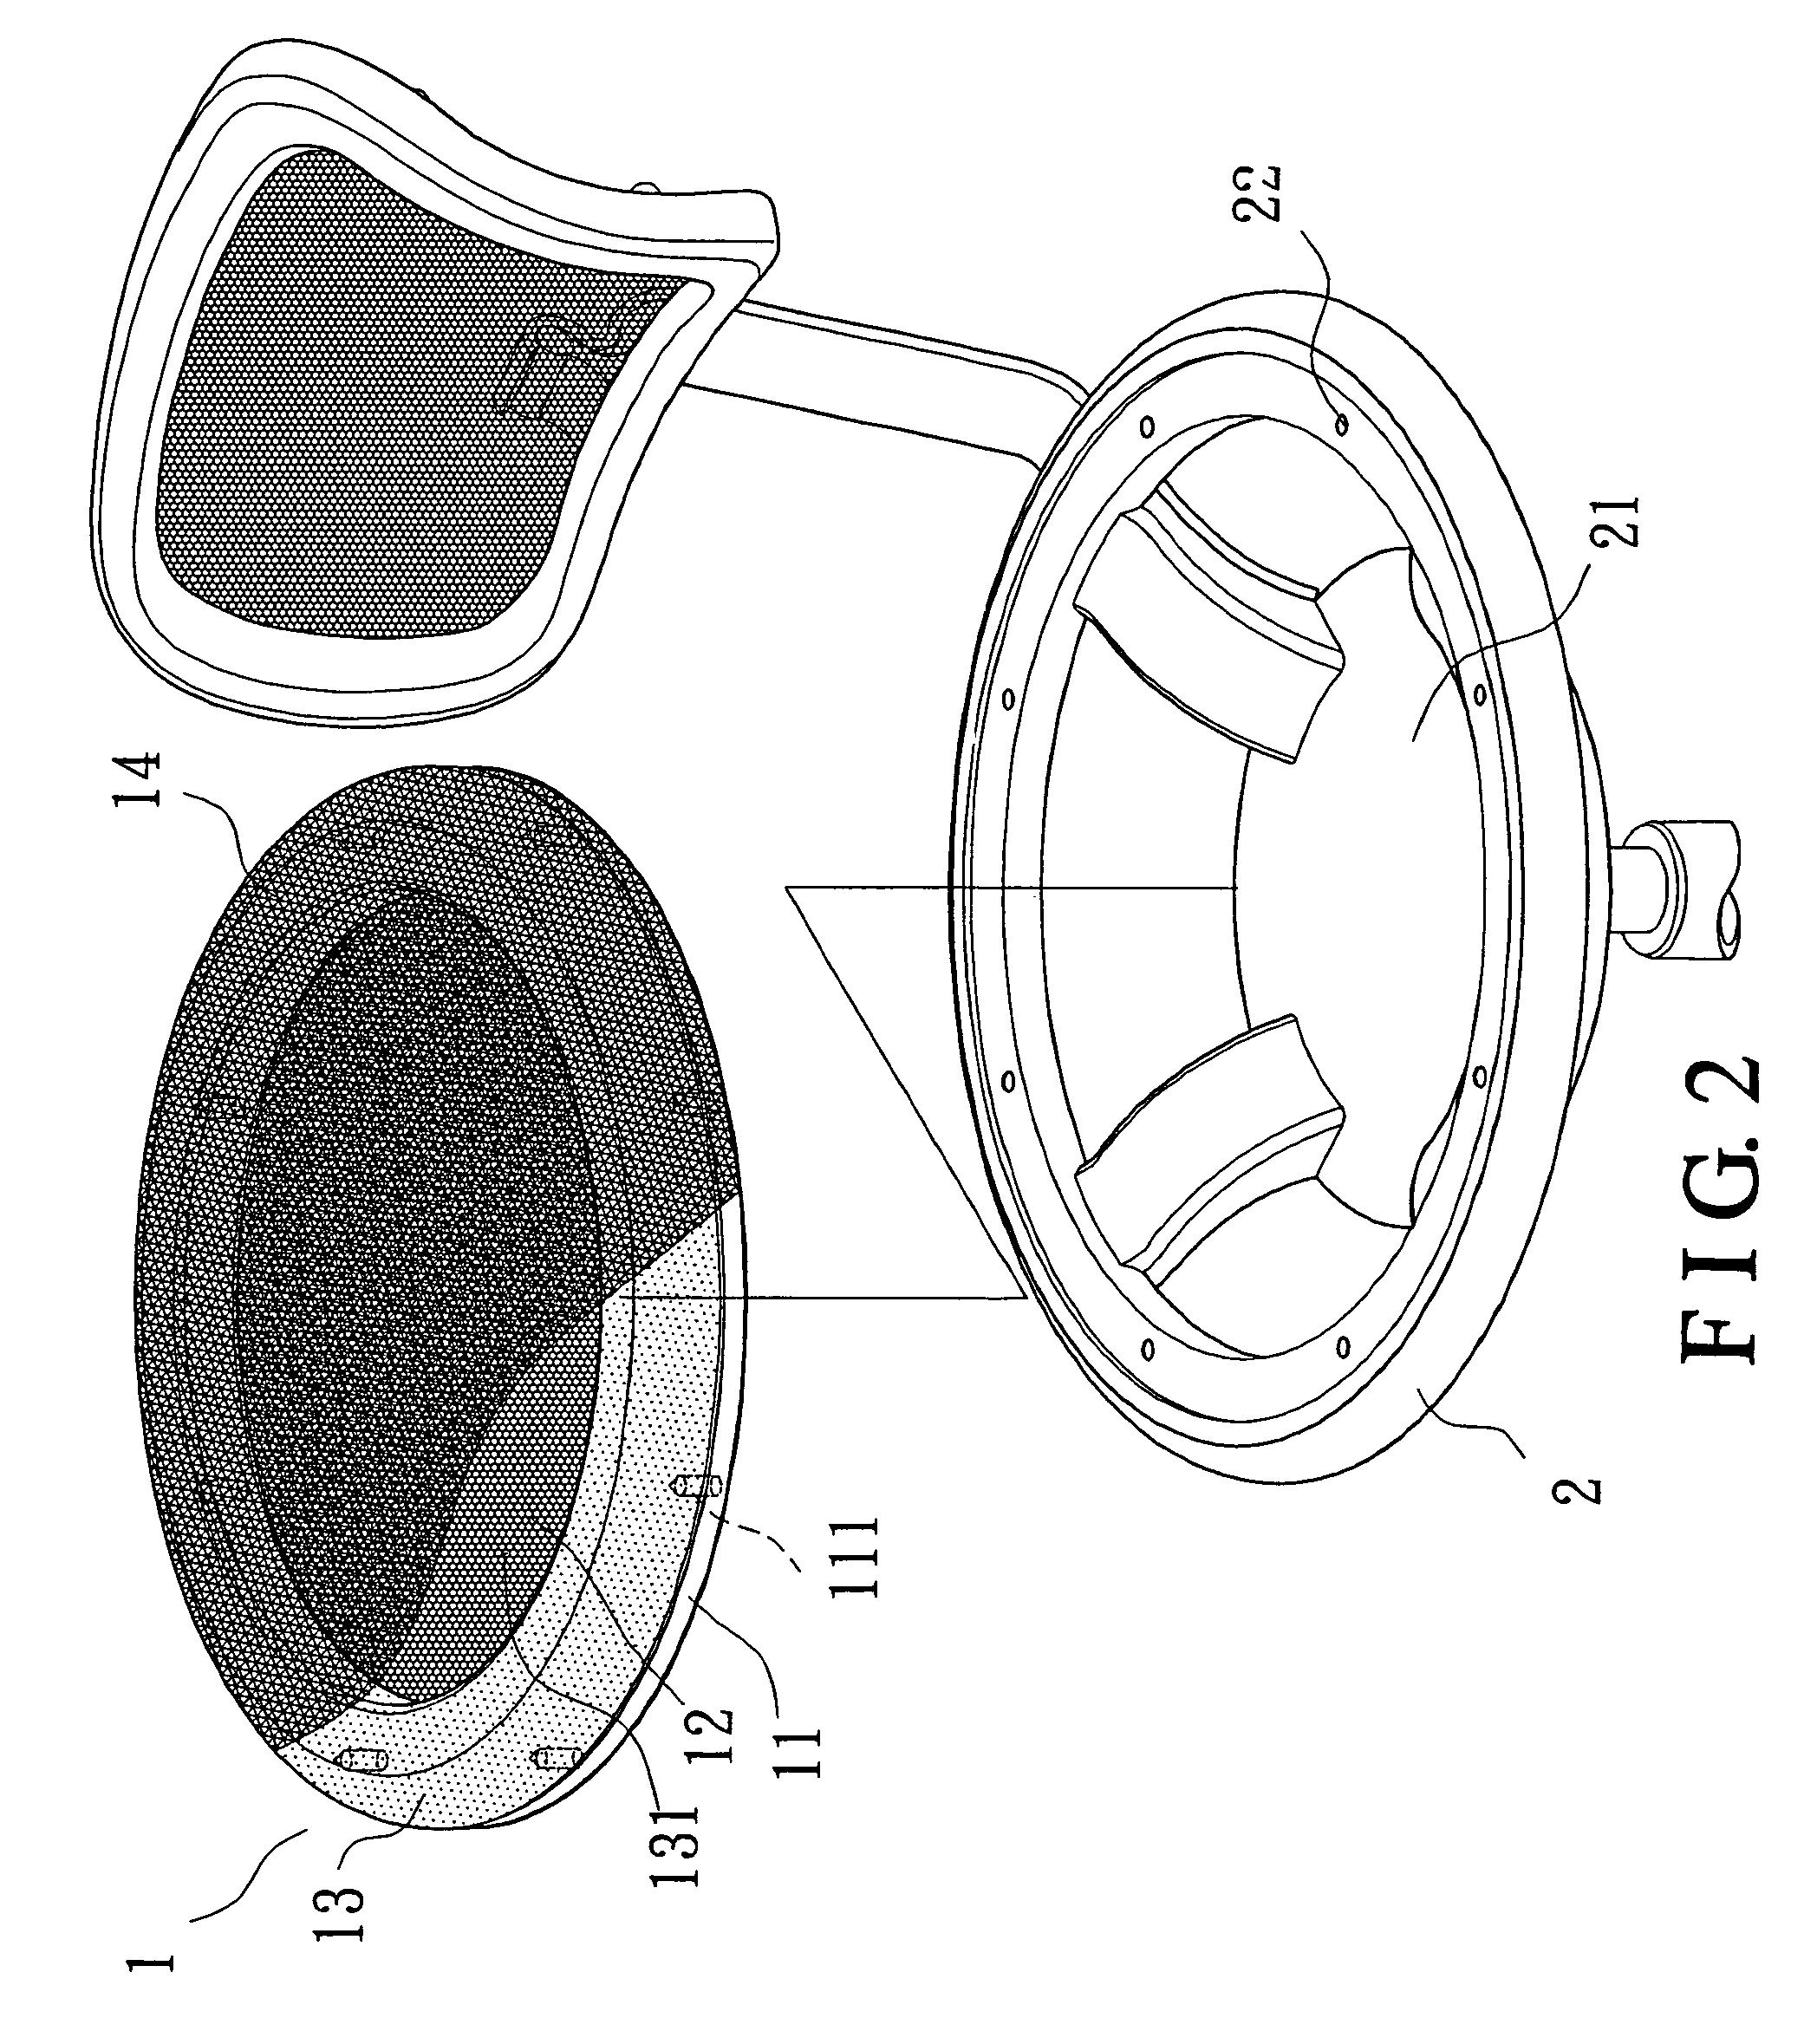 Structure of a double-mesh seat of a chair